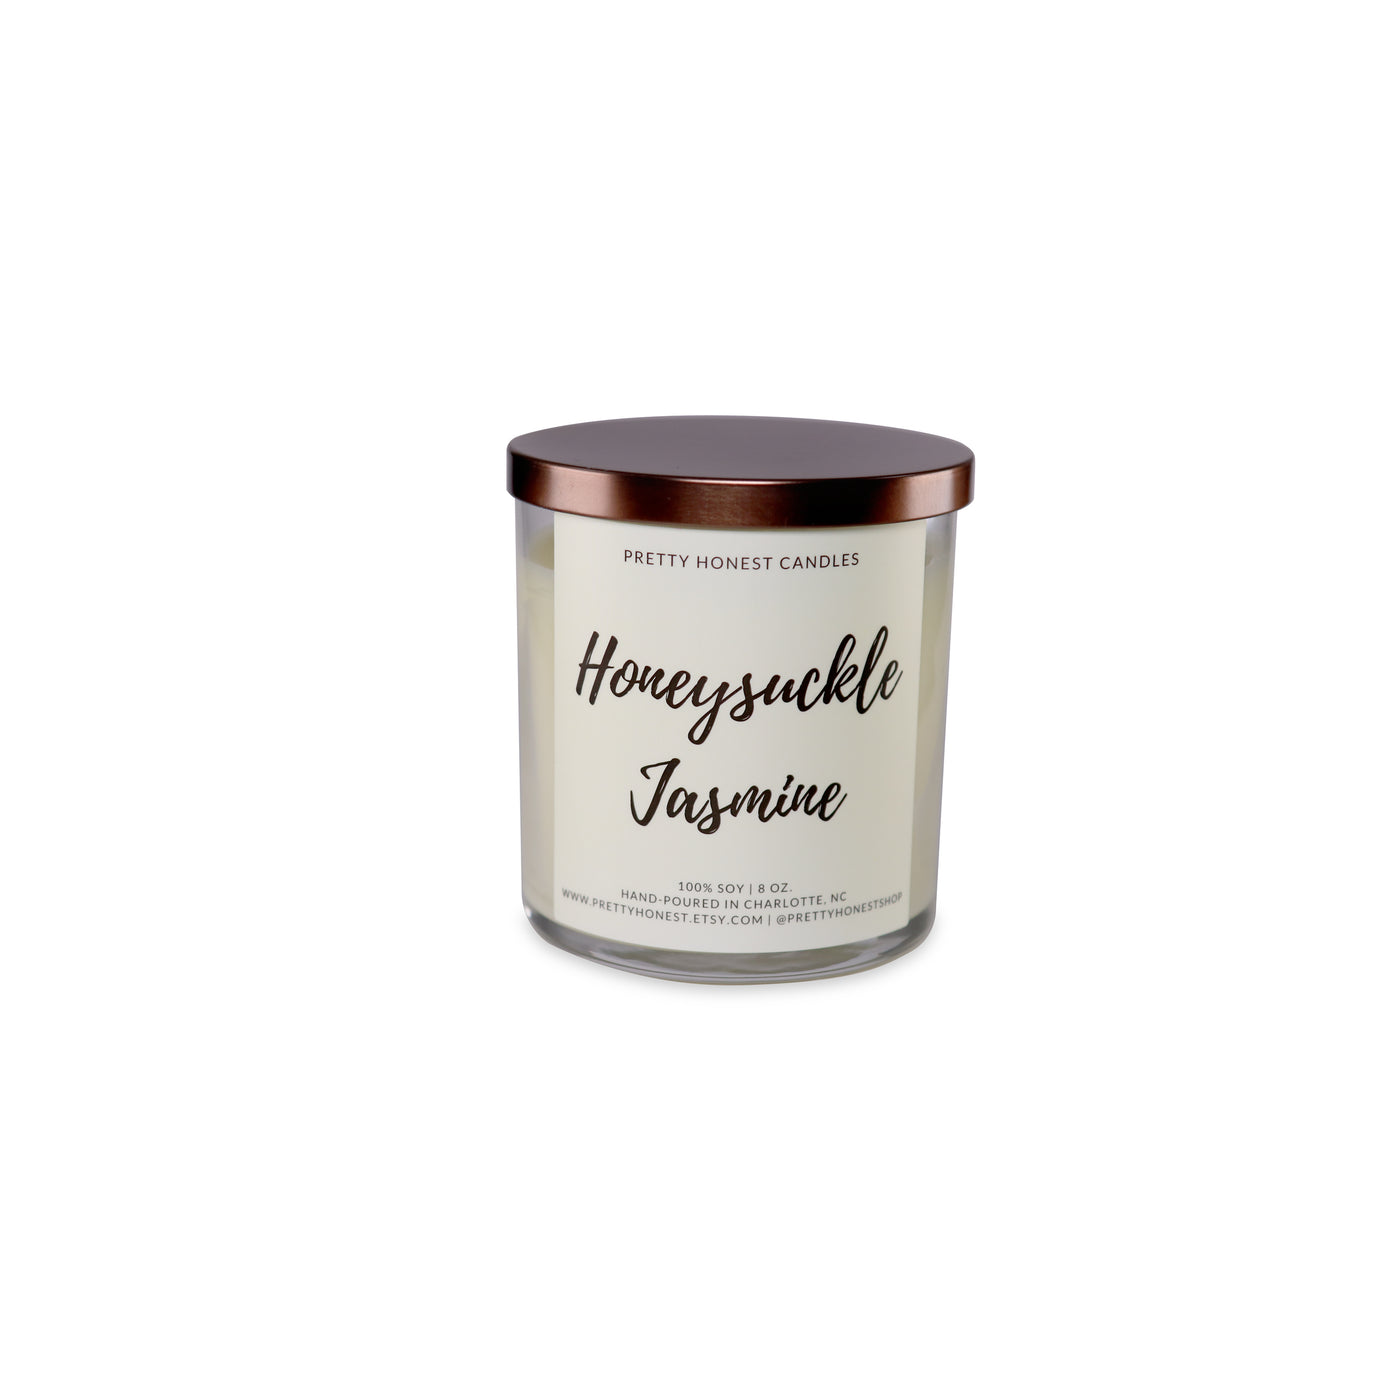 Honeysuckle Jasmine Soy Candle - Pretty Honest Candles